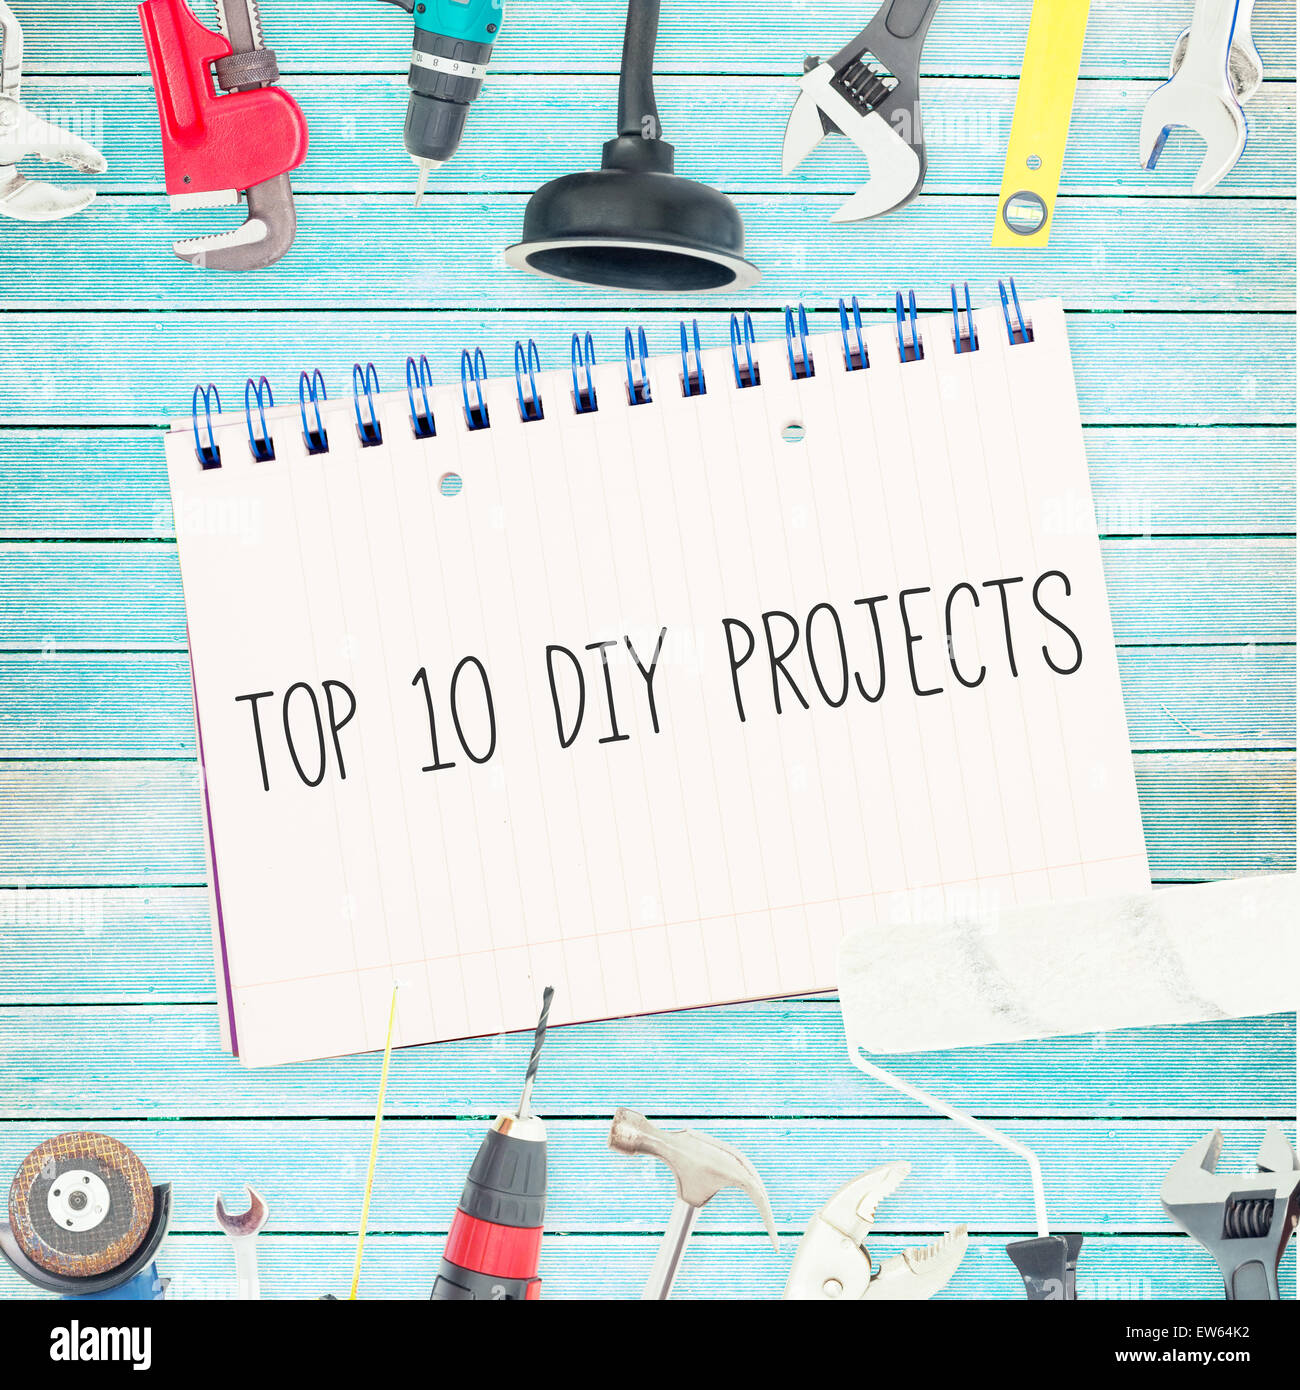 Top 10 diy projects against tools and notepad on wooden background Stock Photo